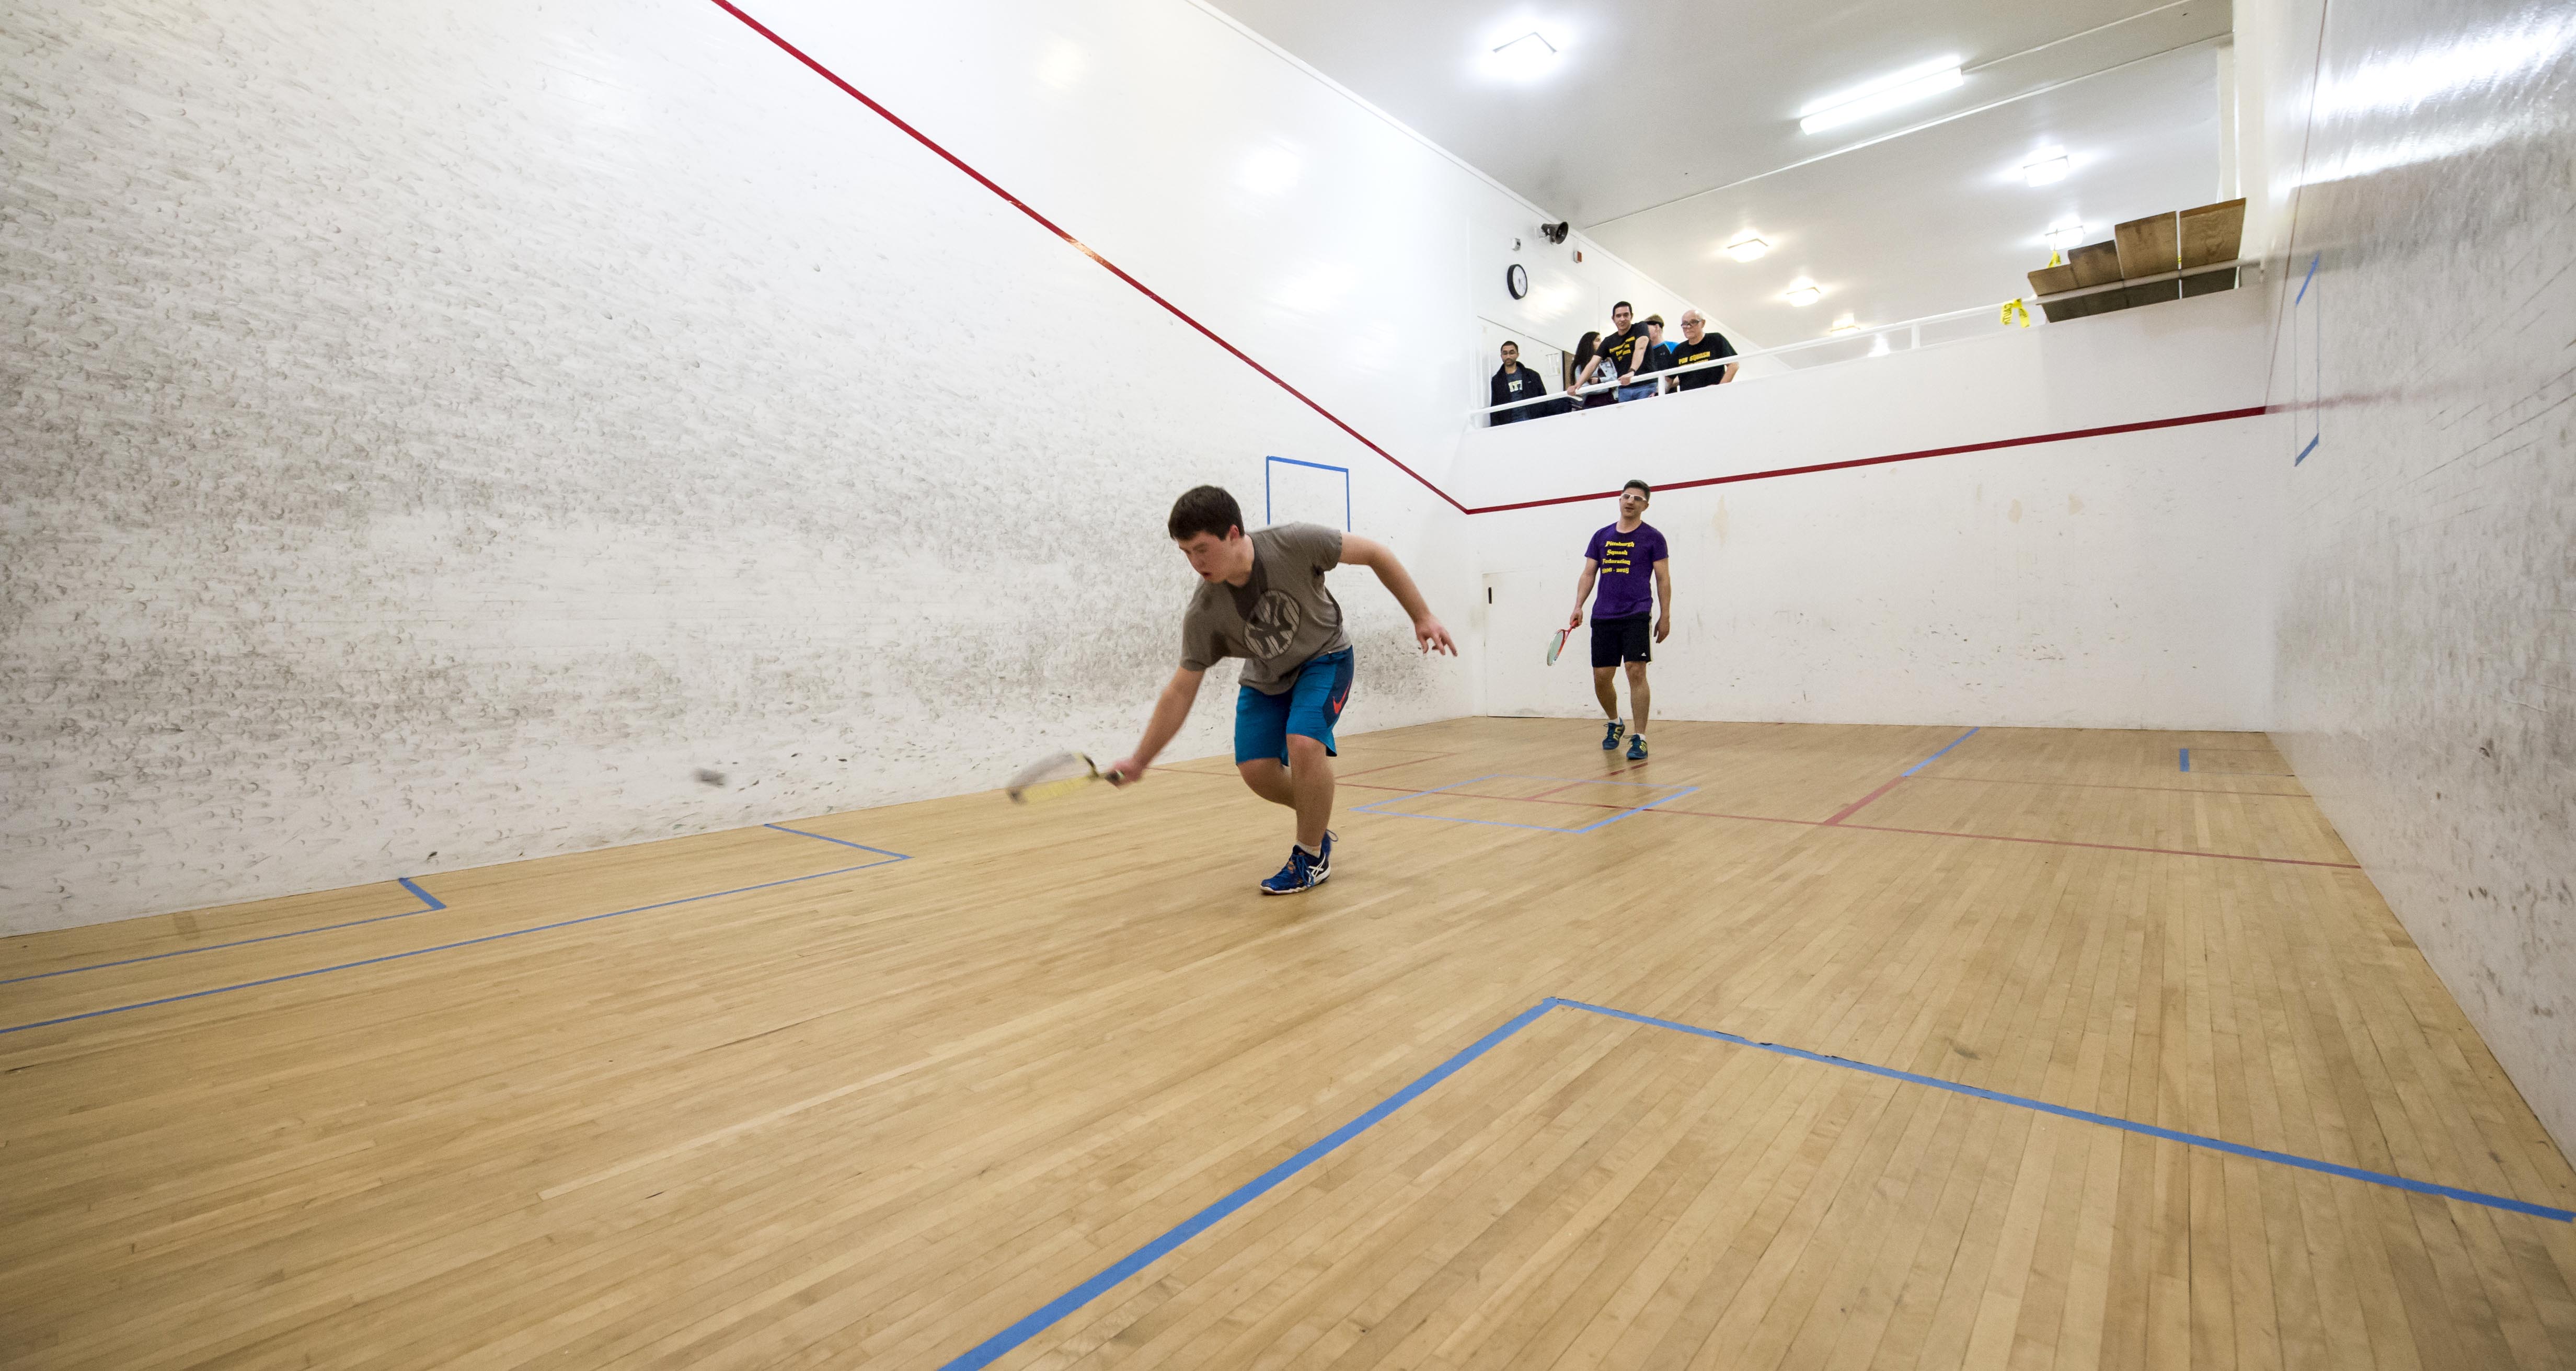 Squash federation brings together diverse group from across Pitt